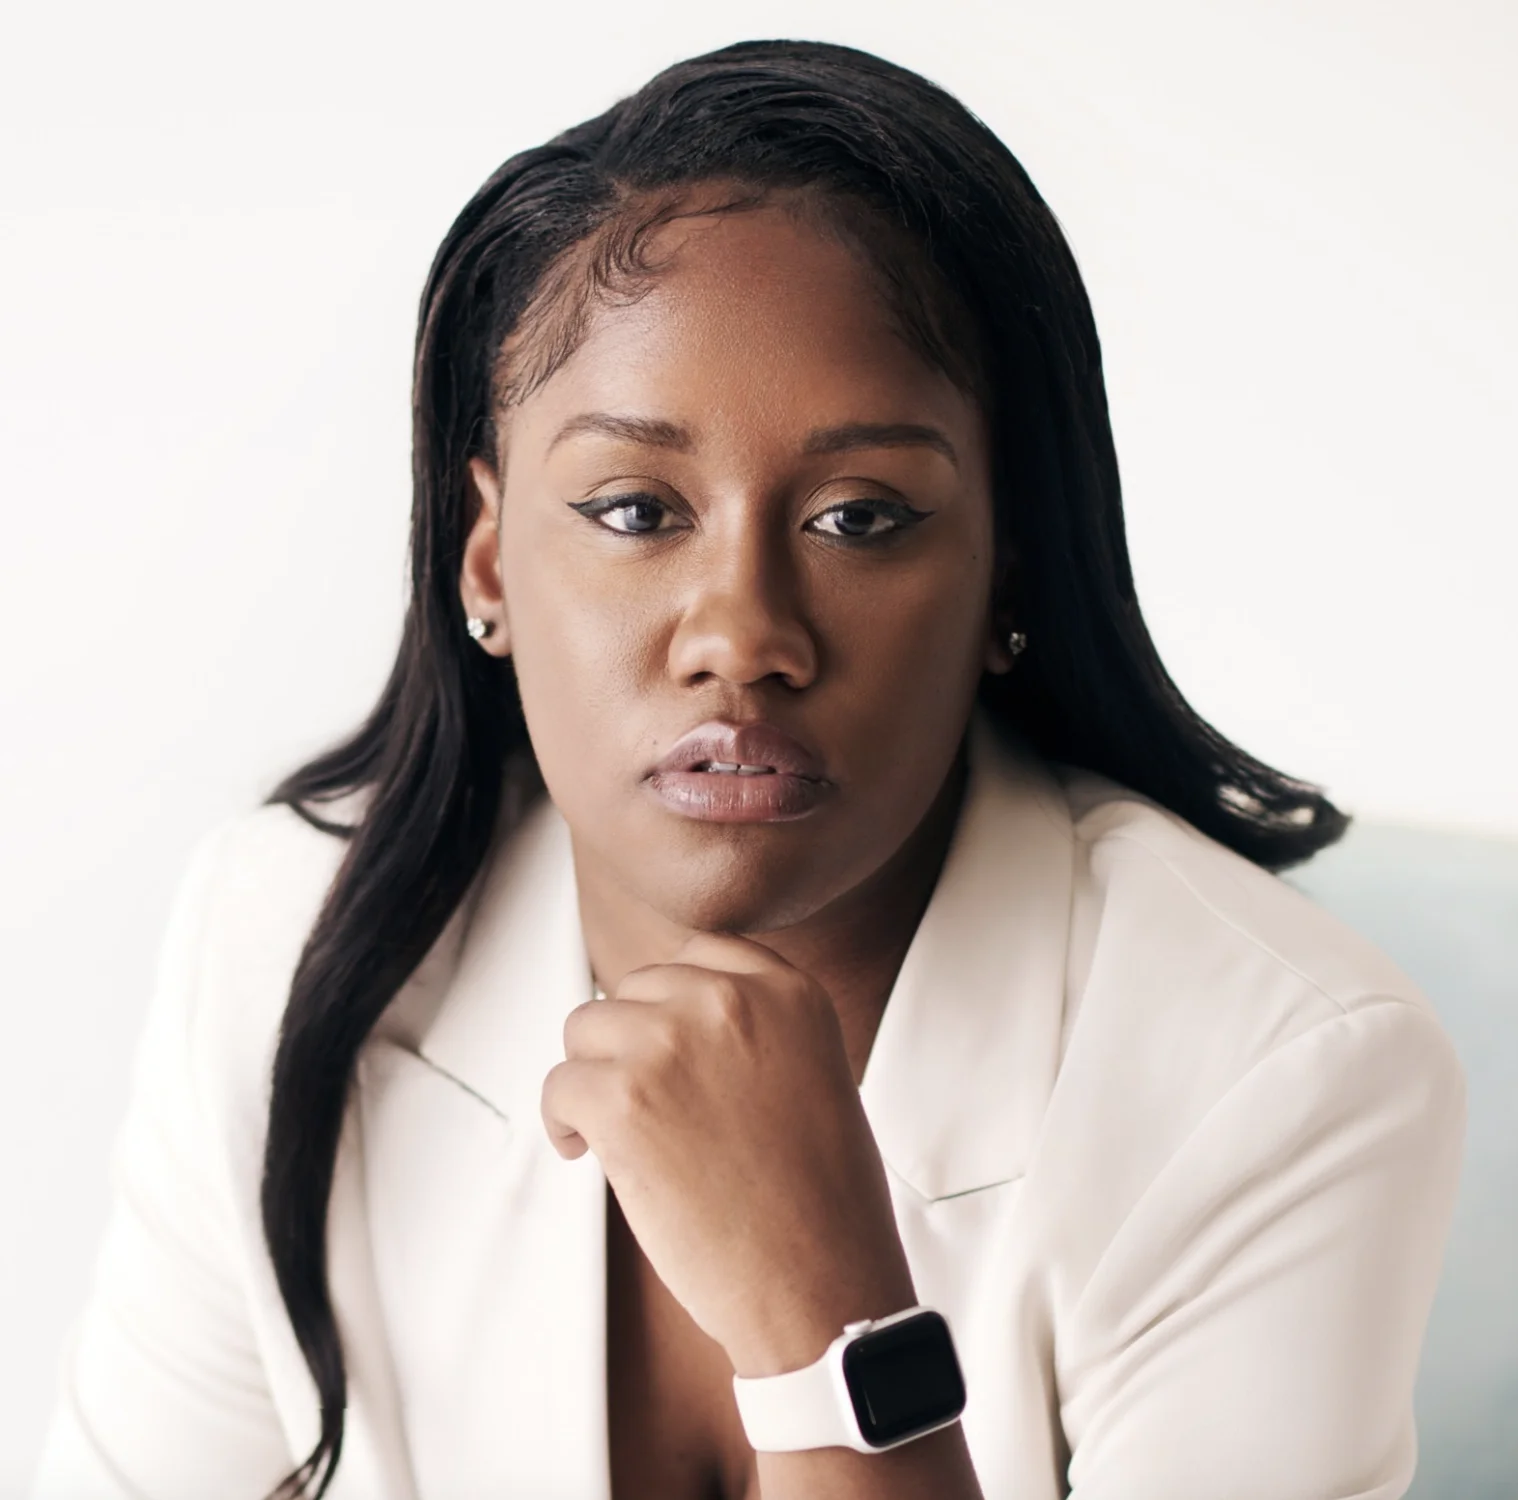 Rishielle Giscombe stares directly into the camera with her chin resting on her hand. She is wearing a cream blazer and watch.